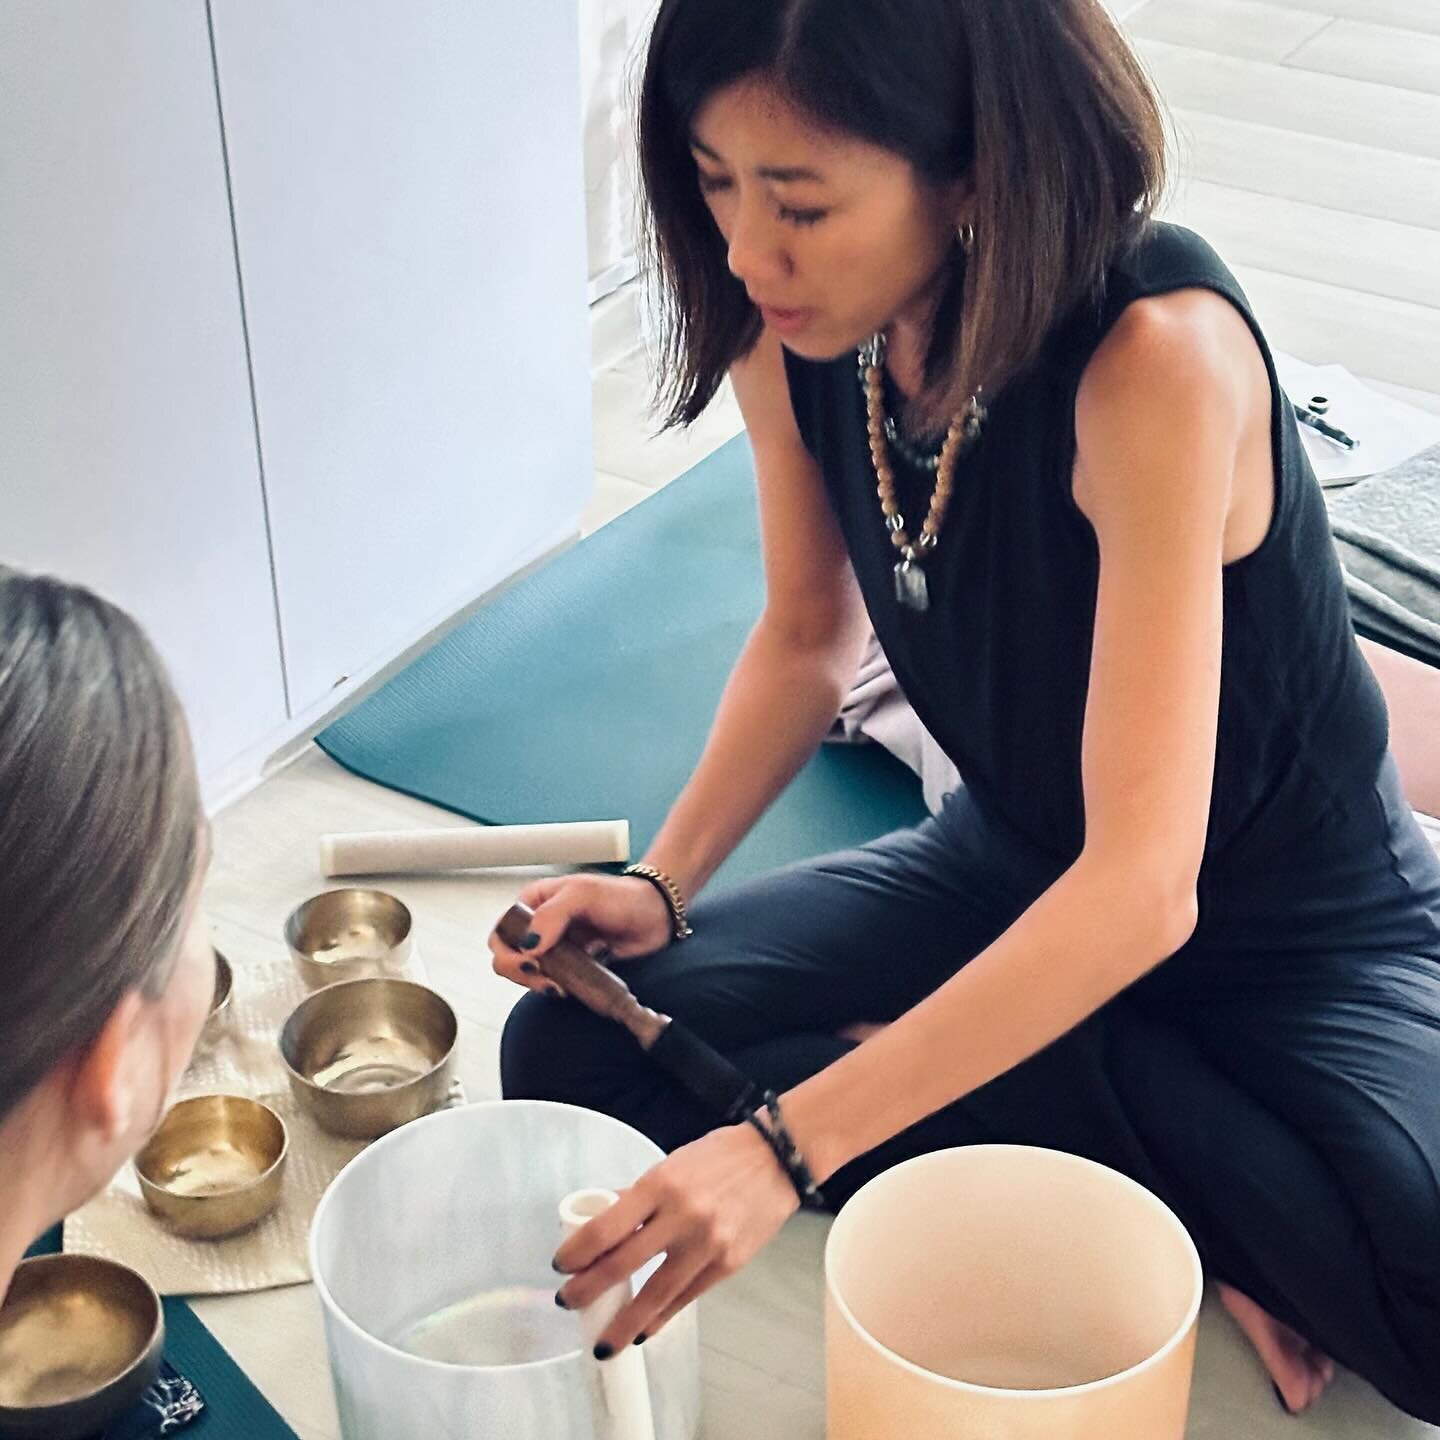 Looking back on my first Singing Bowl Facilitator Training Workshop @yicsingapore earlier this month:
⠀⠀⠀⠀⠀⠀⠀⠀⠀
I believe in the healing power of human connection. Over the past two years, I have been investing my time and energy wisely in building m